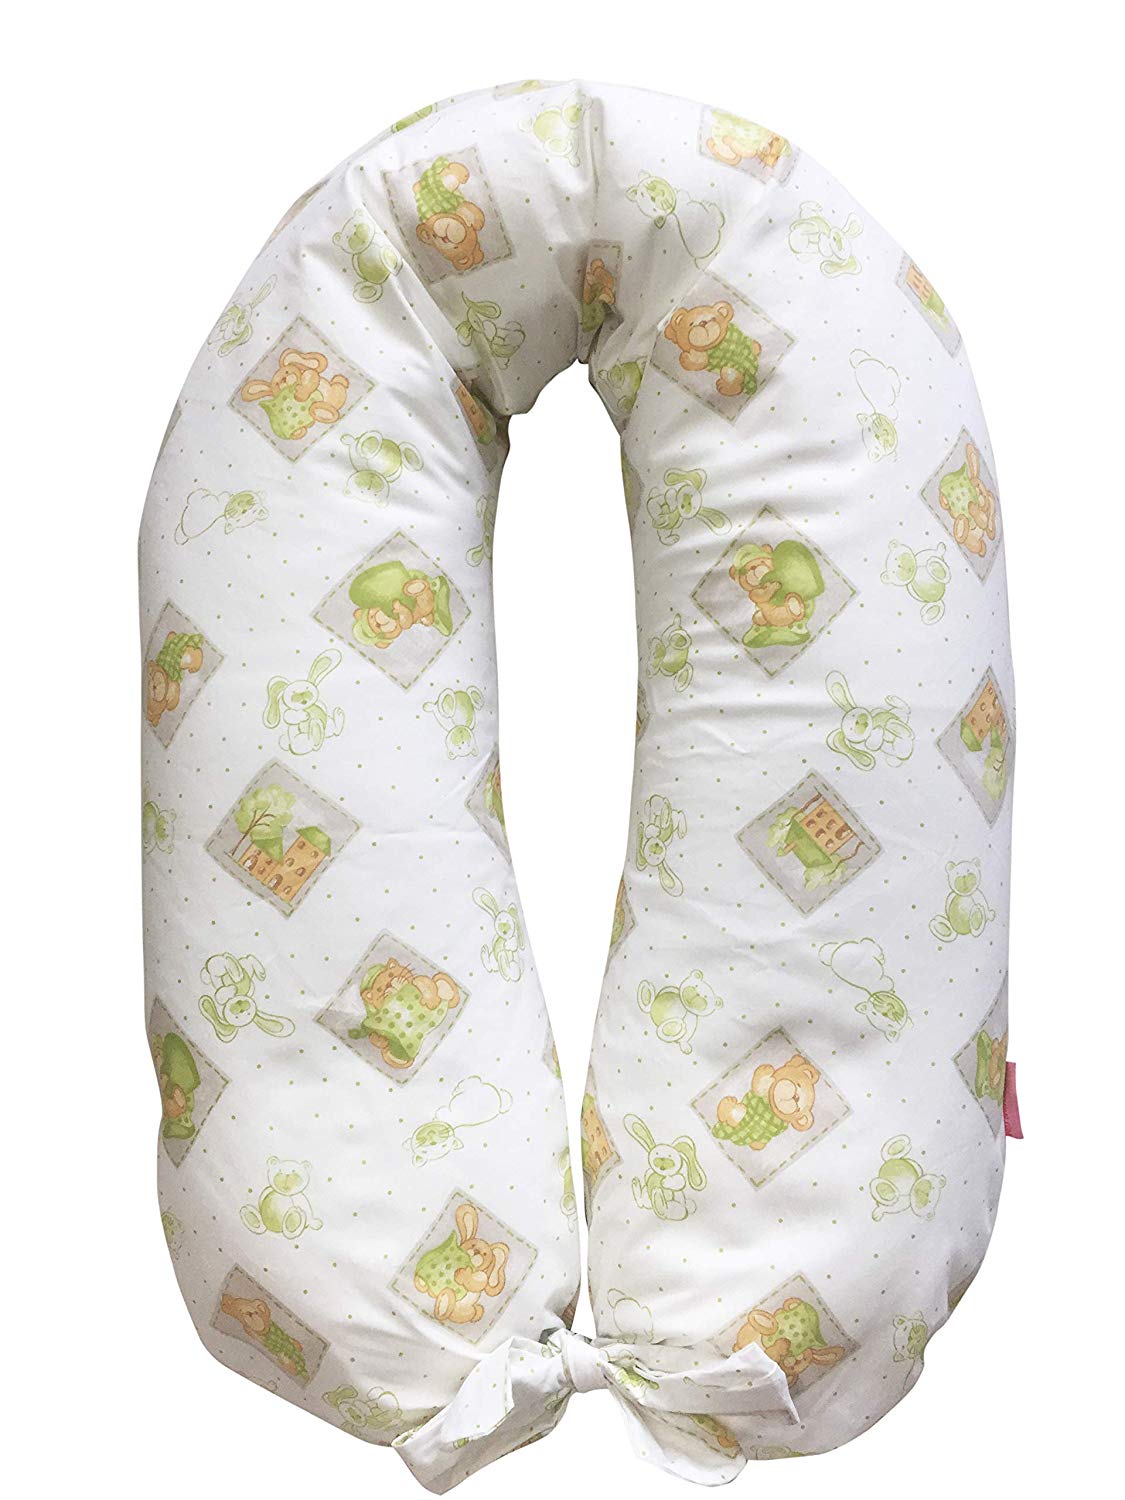 Merrymama – Nursing Pillow And Pregnancy Filled with Polystyrene Balls Filling with Ties/cm 190 mm Polystyrene Fire Retardant)